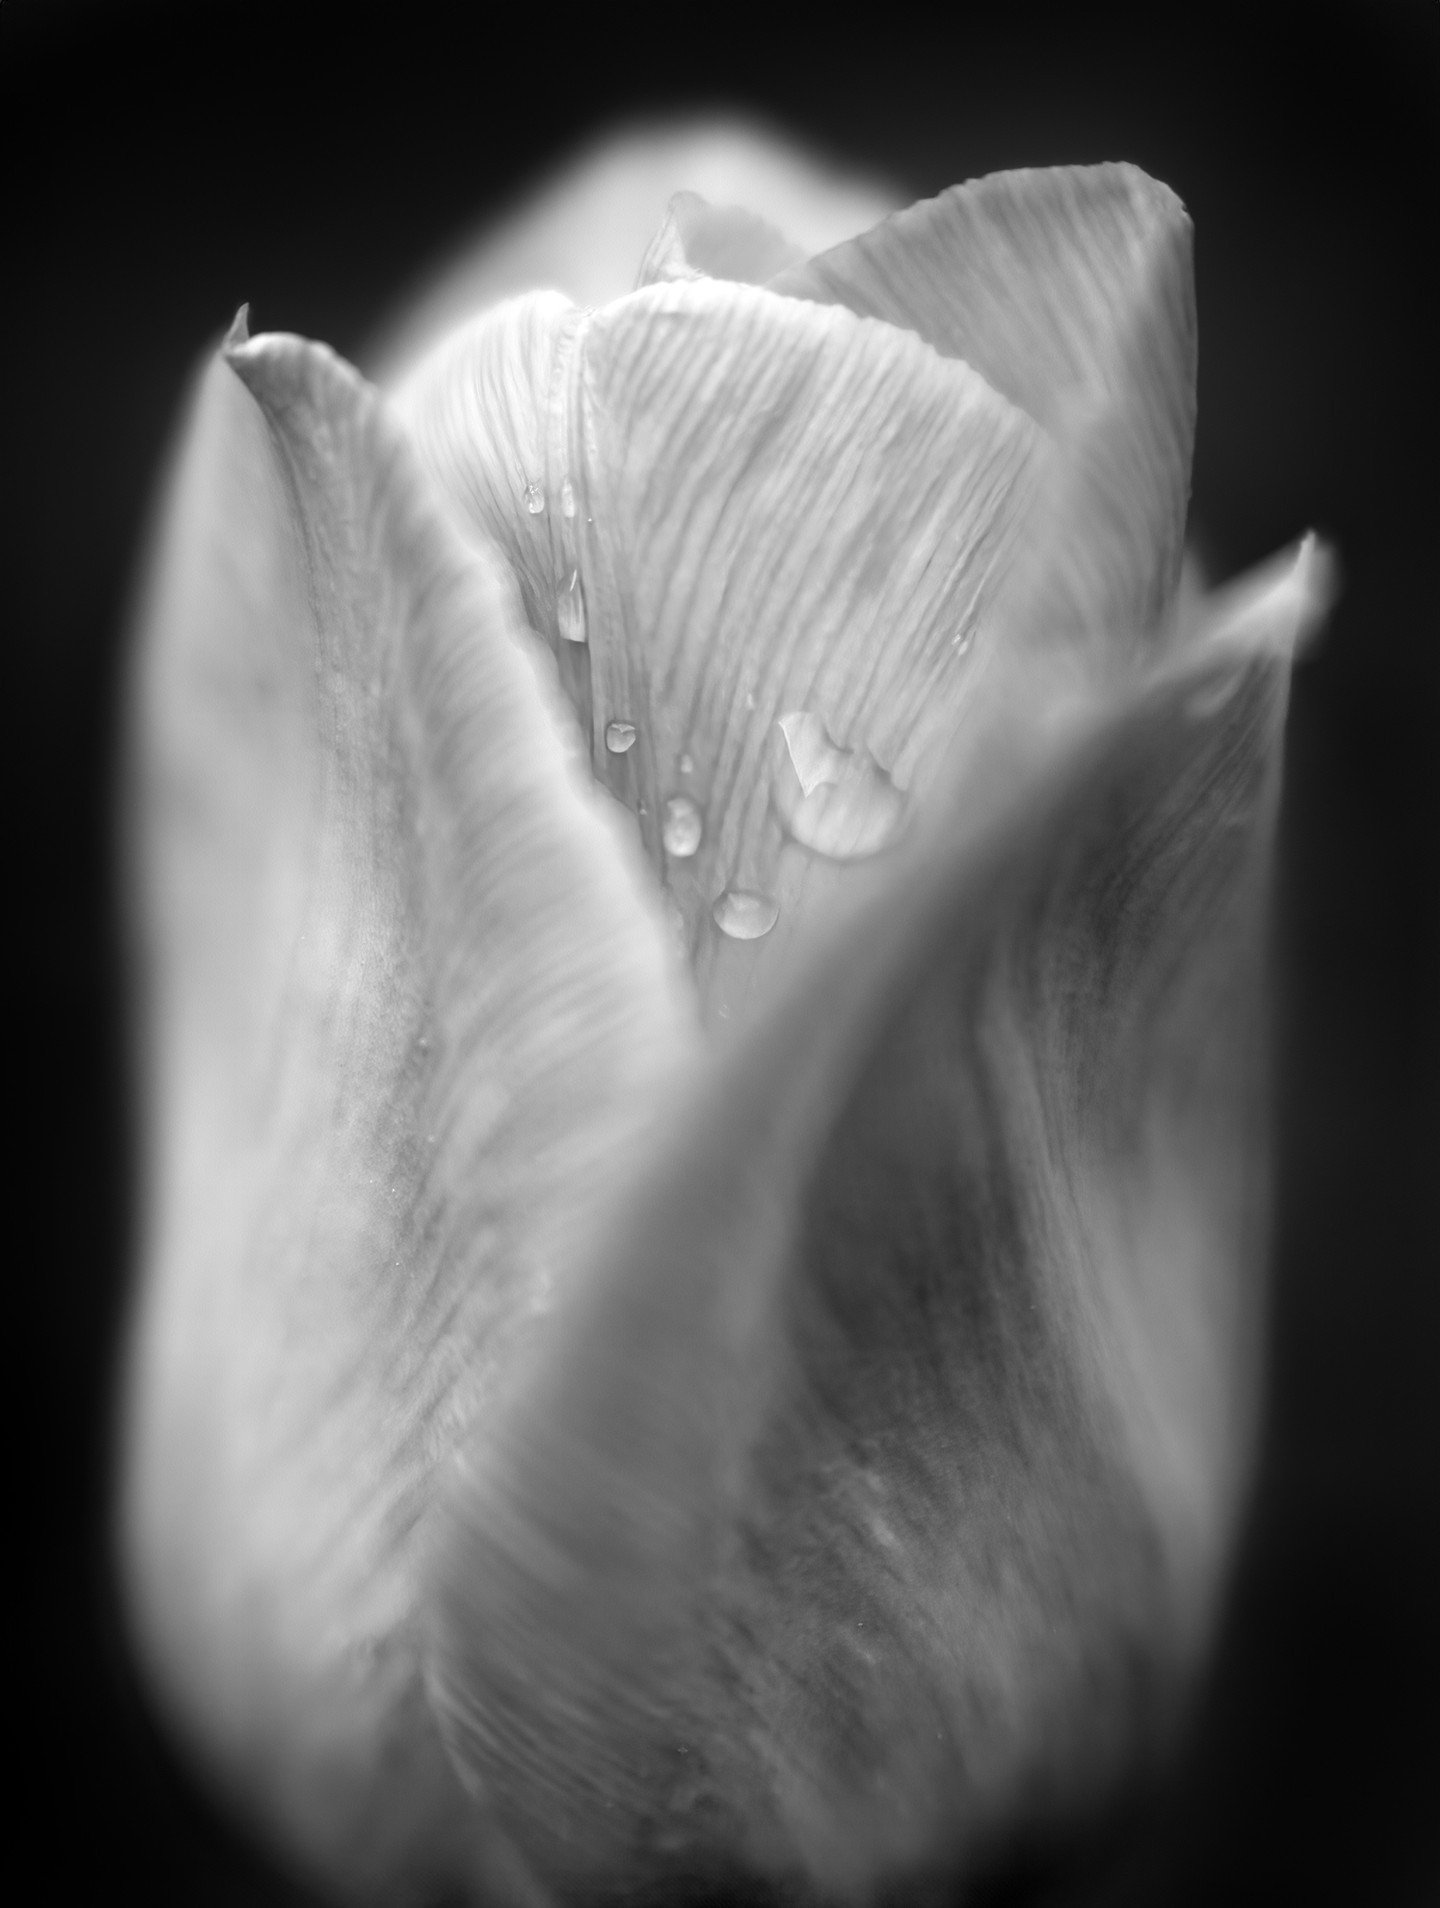 A close-up black and white photo captures the delicate texture of a tulip's petals, with a few droplets of water adorning its surface. The focus is soft, contributing to the image's dreamlike quality and highlighting the subtle details of the flower.